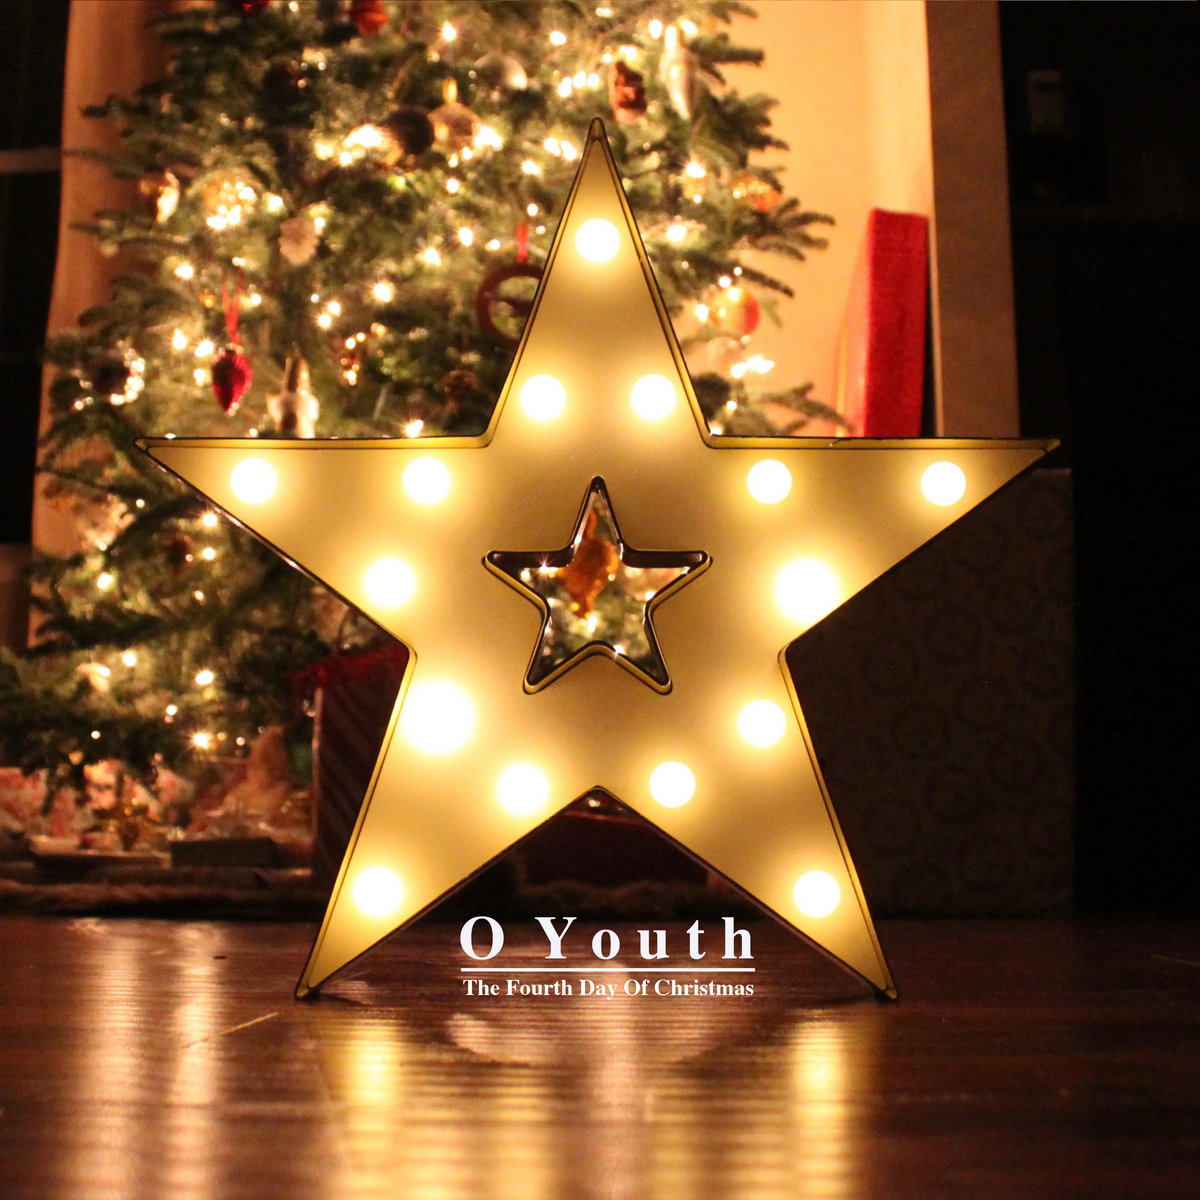 Christmas In Prison O Youth